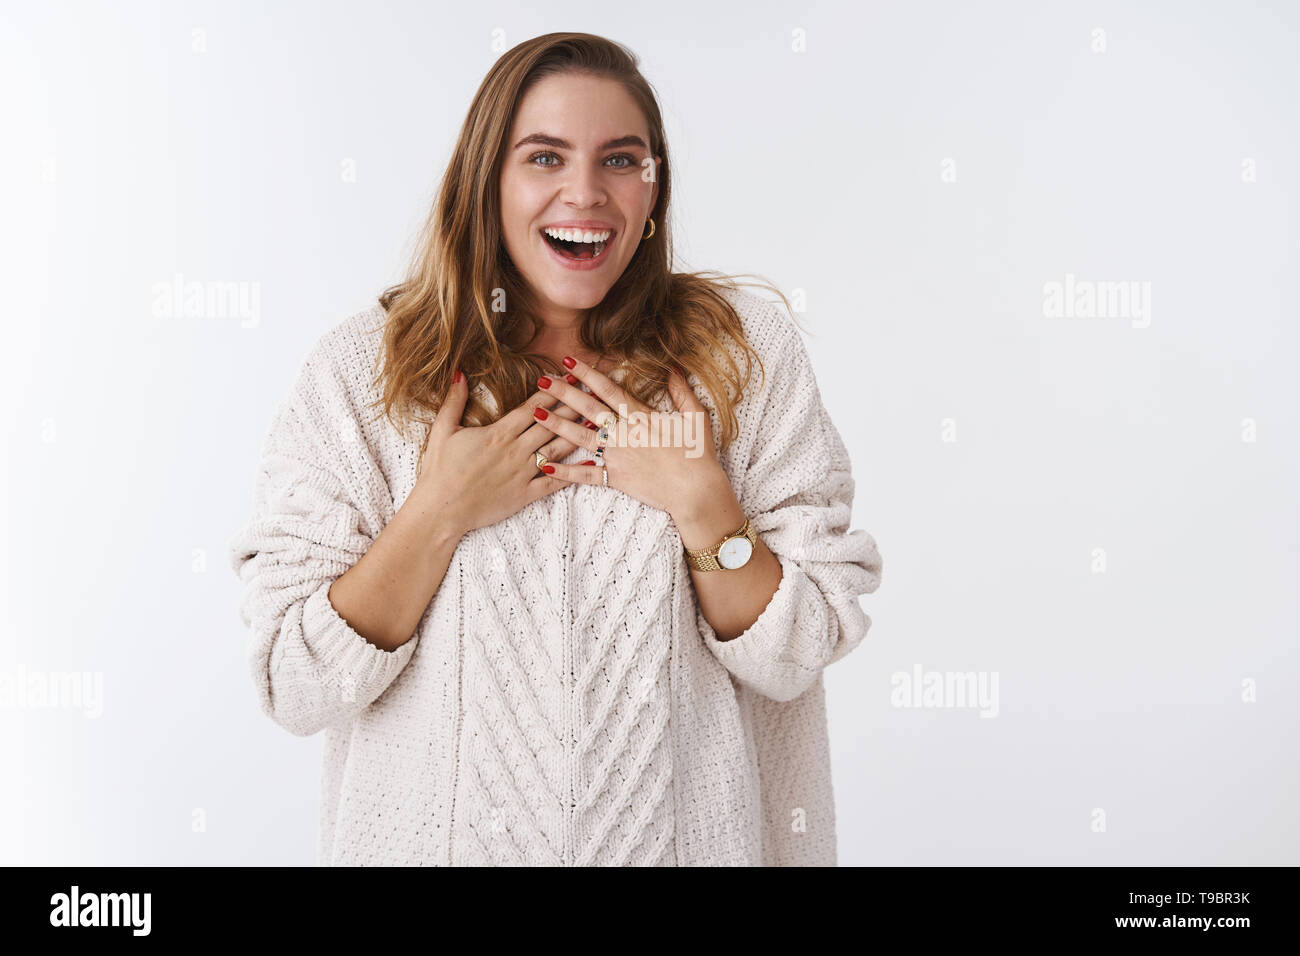 Surprised attractive charismatic caucasian woman wearing loose sweater reacting incredible pleasant unexpected gift smiling broadly speechless smiling Stock Photo